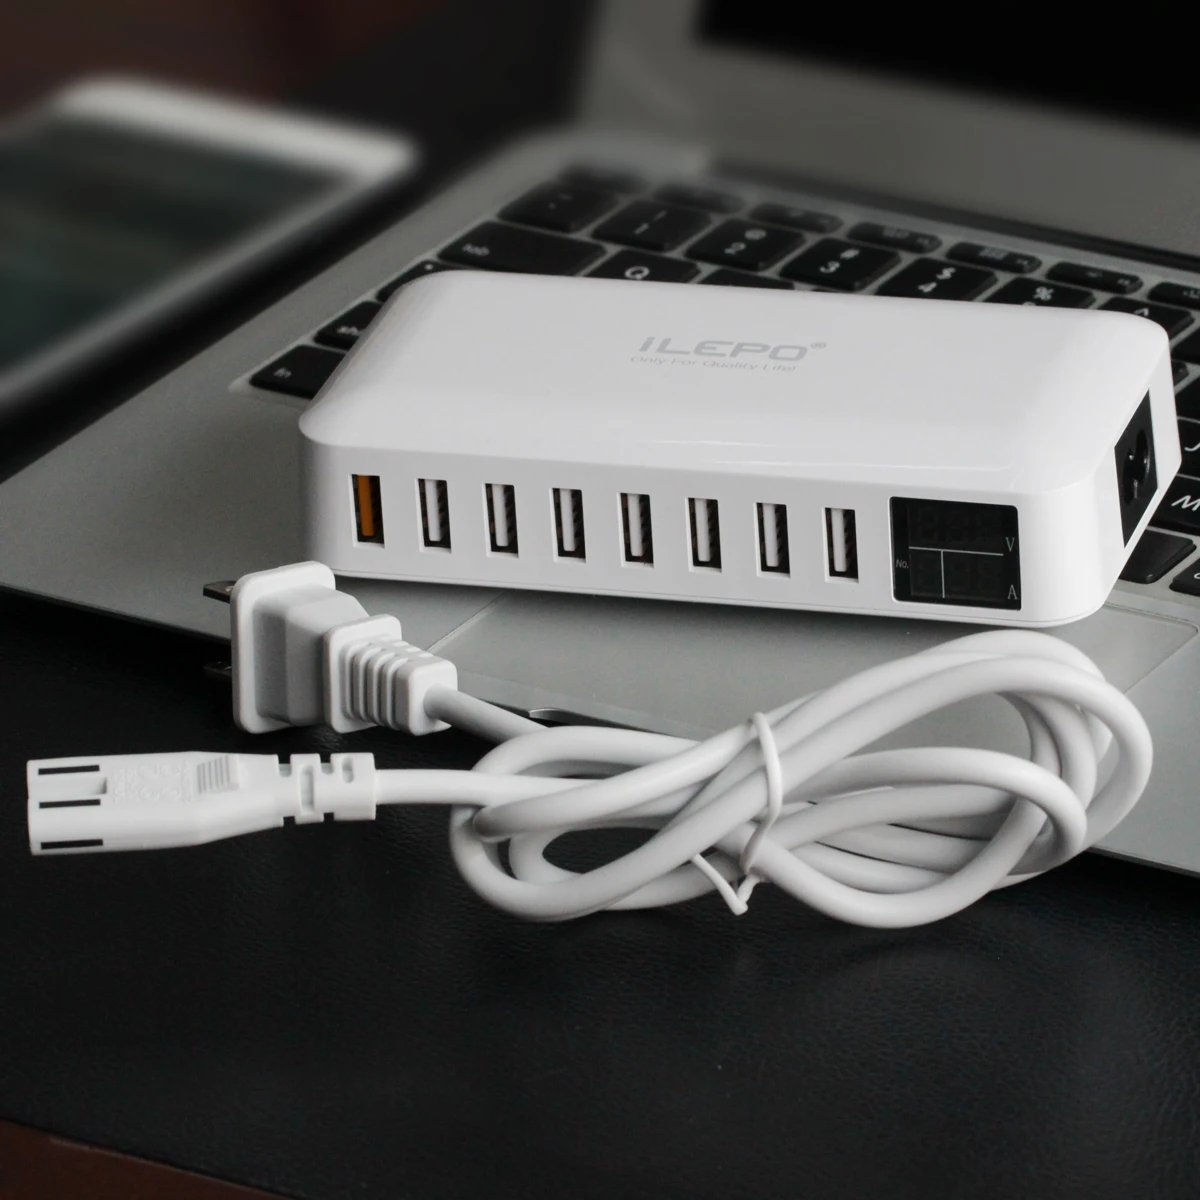 

60W 8 Port Multiple USB Charger LCD Display Charging Station With Quick Charger 3.0 for Laptops, Tablets, and Phones, White